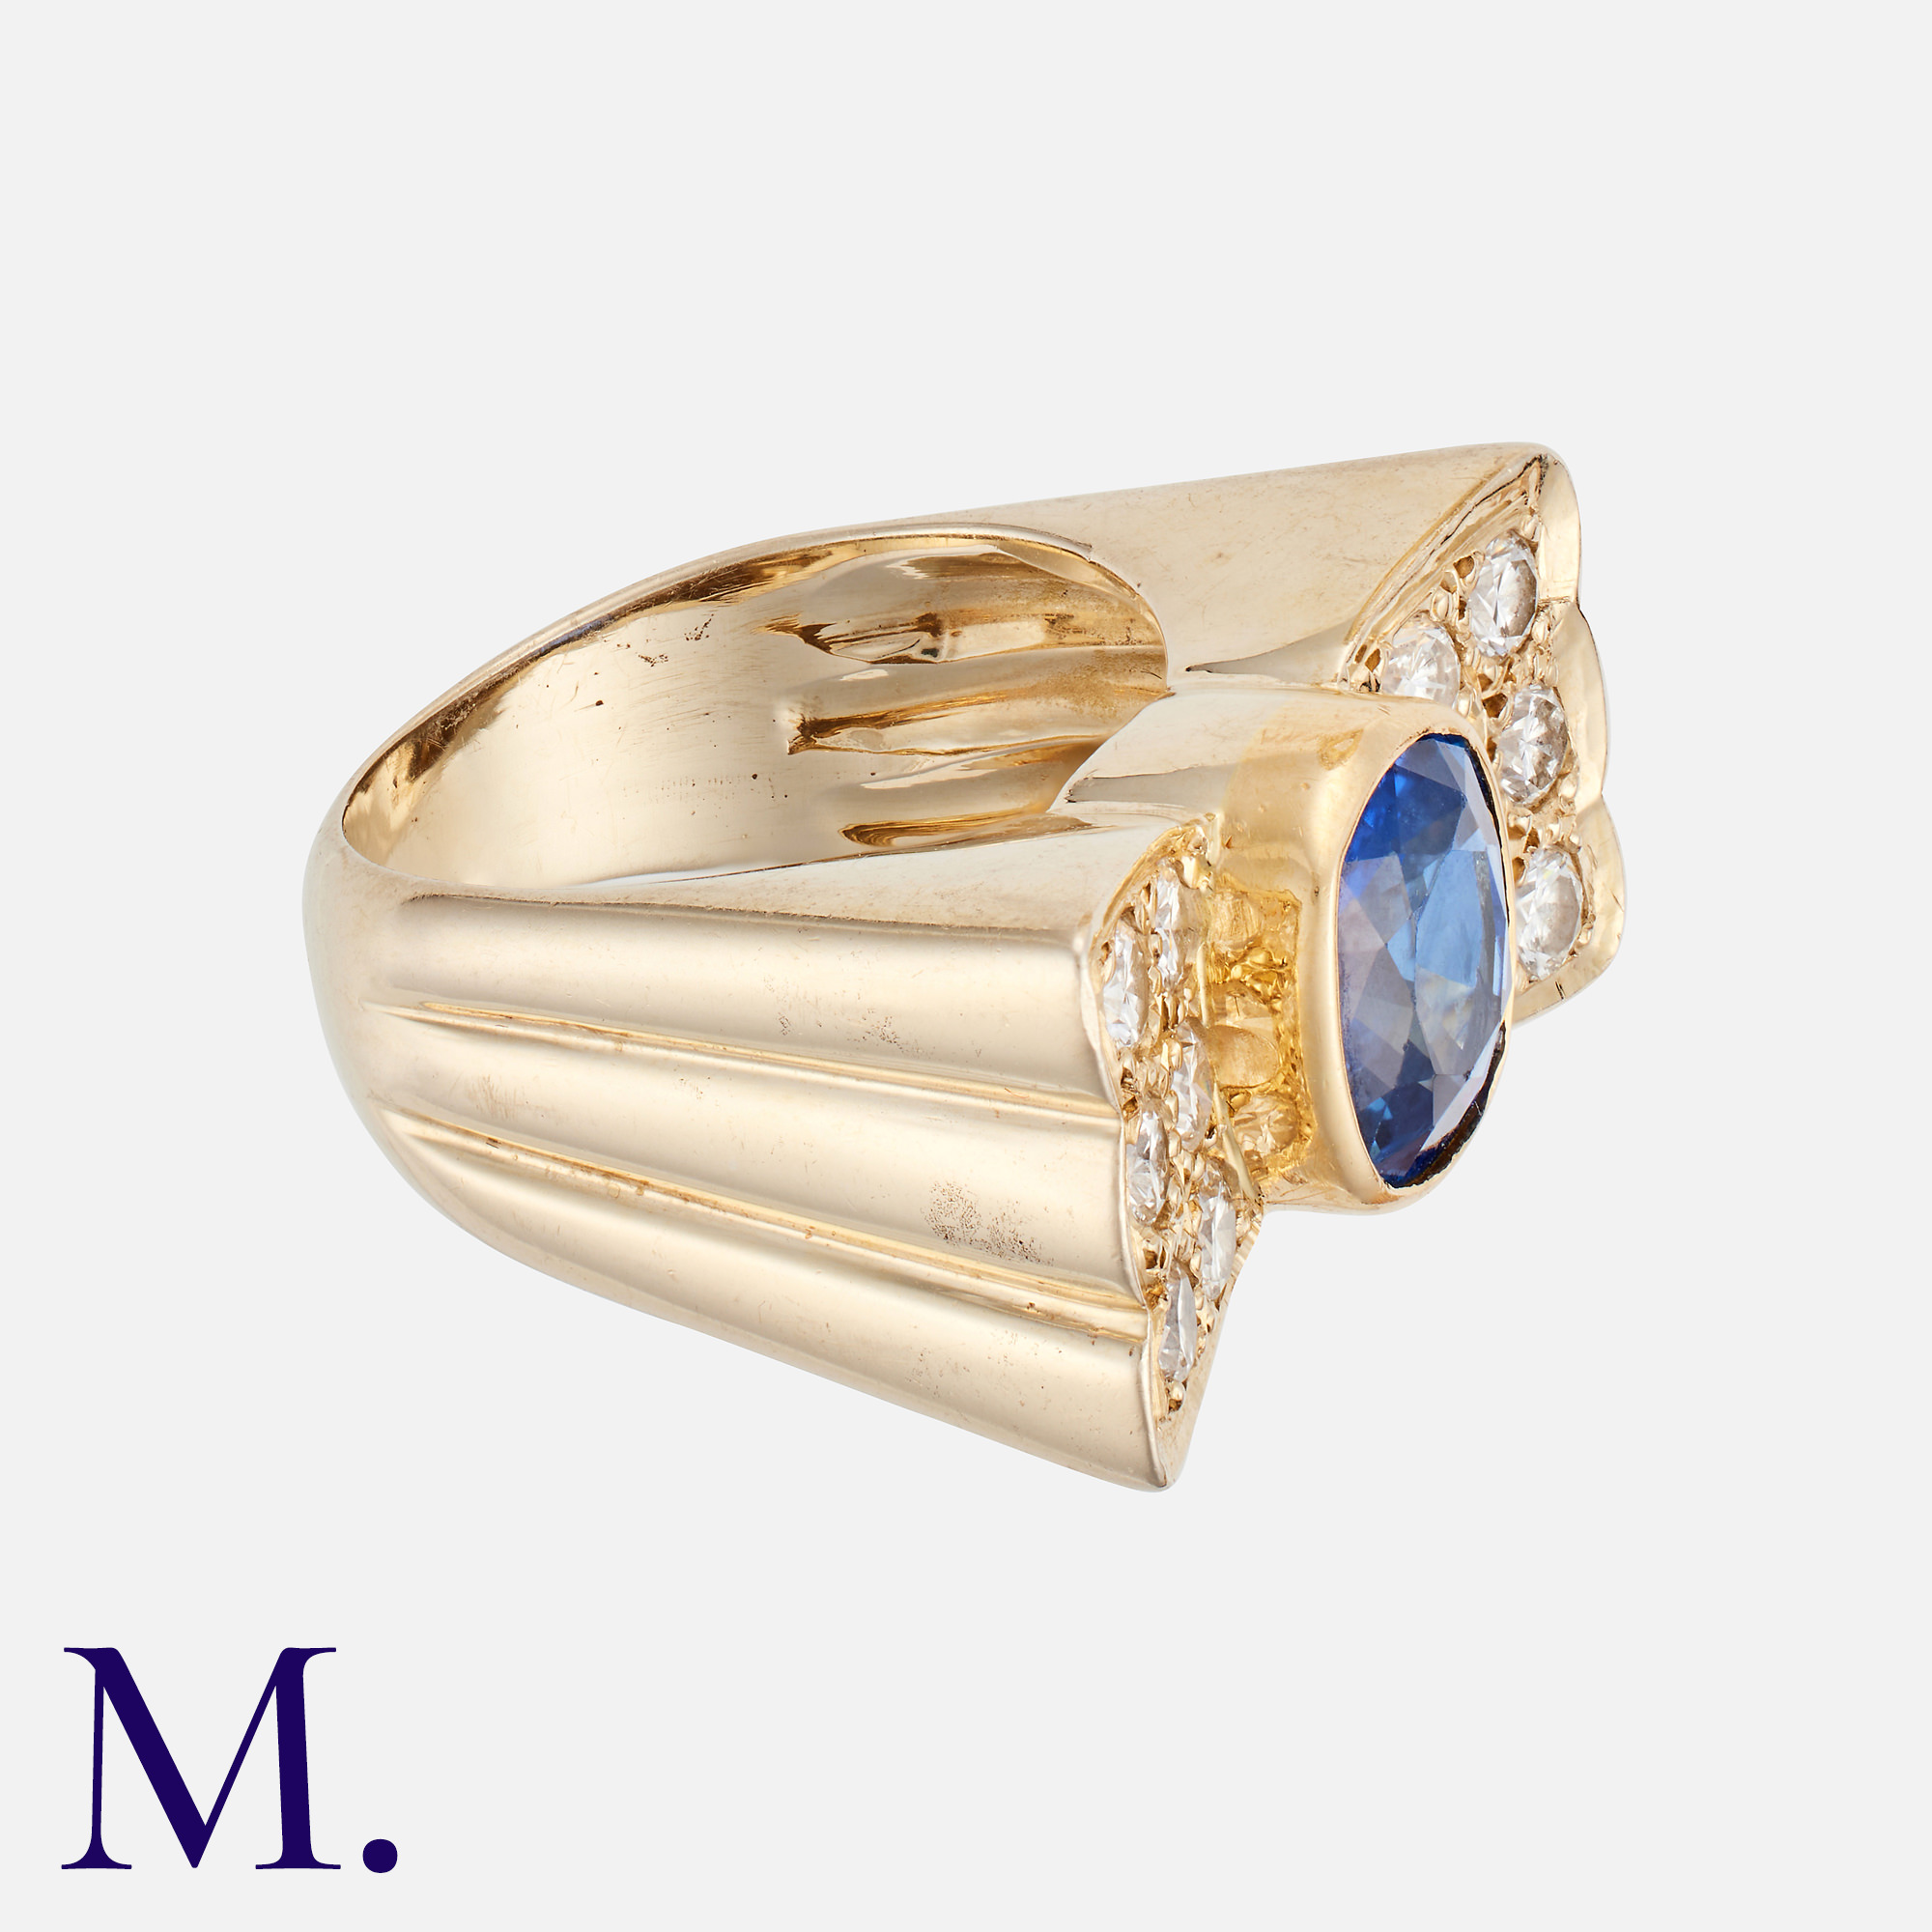 A Sapphire & Diamond Retro Ring in 18K yellow gold, set with an oval-cut sapphire accompanied by a - Image 2 of 2